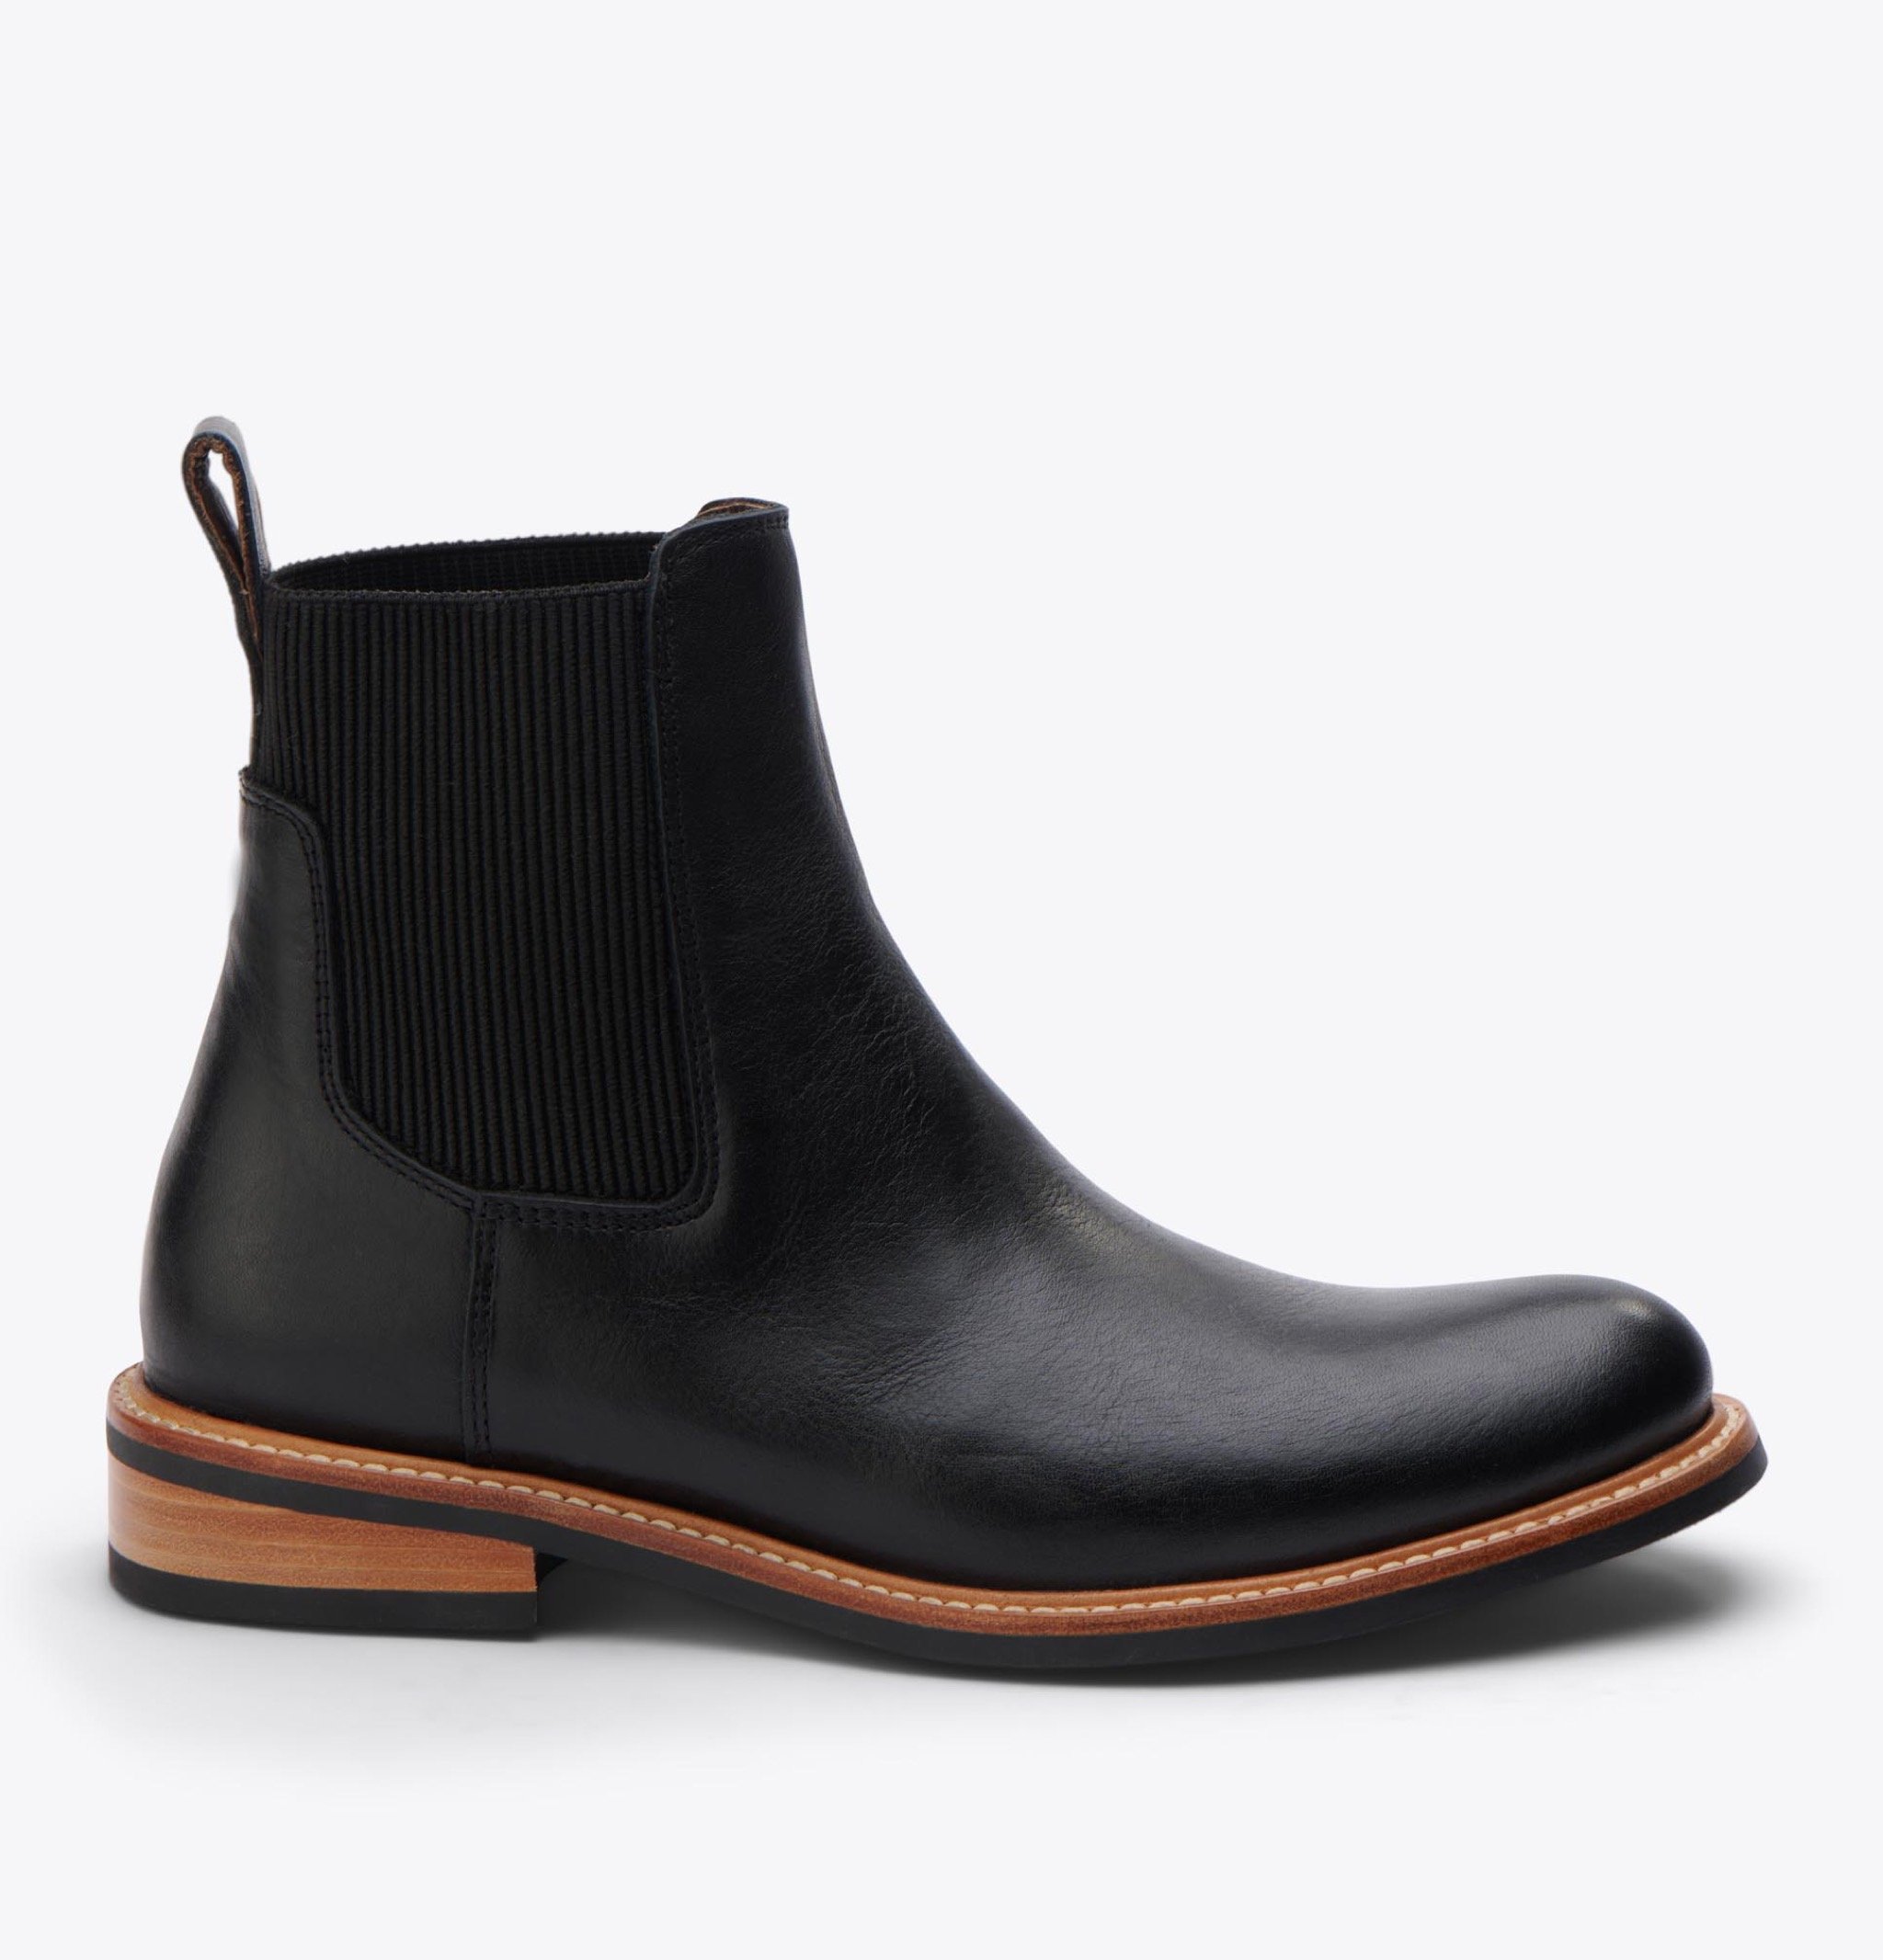 Nisolo Carmen Chelsea Boot Black - Every Nisolo product is built on the foundation of comfort, function, and design. 